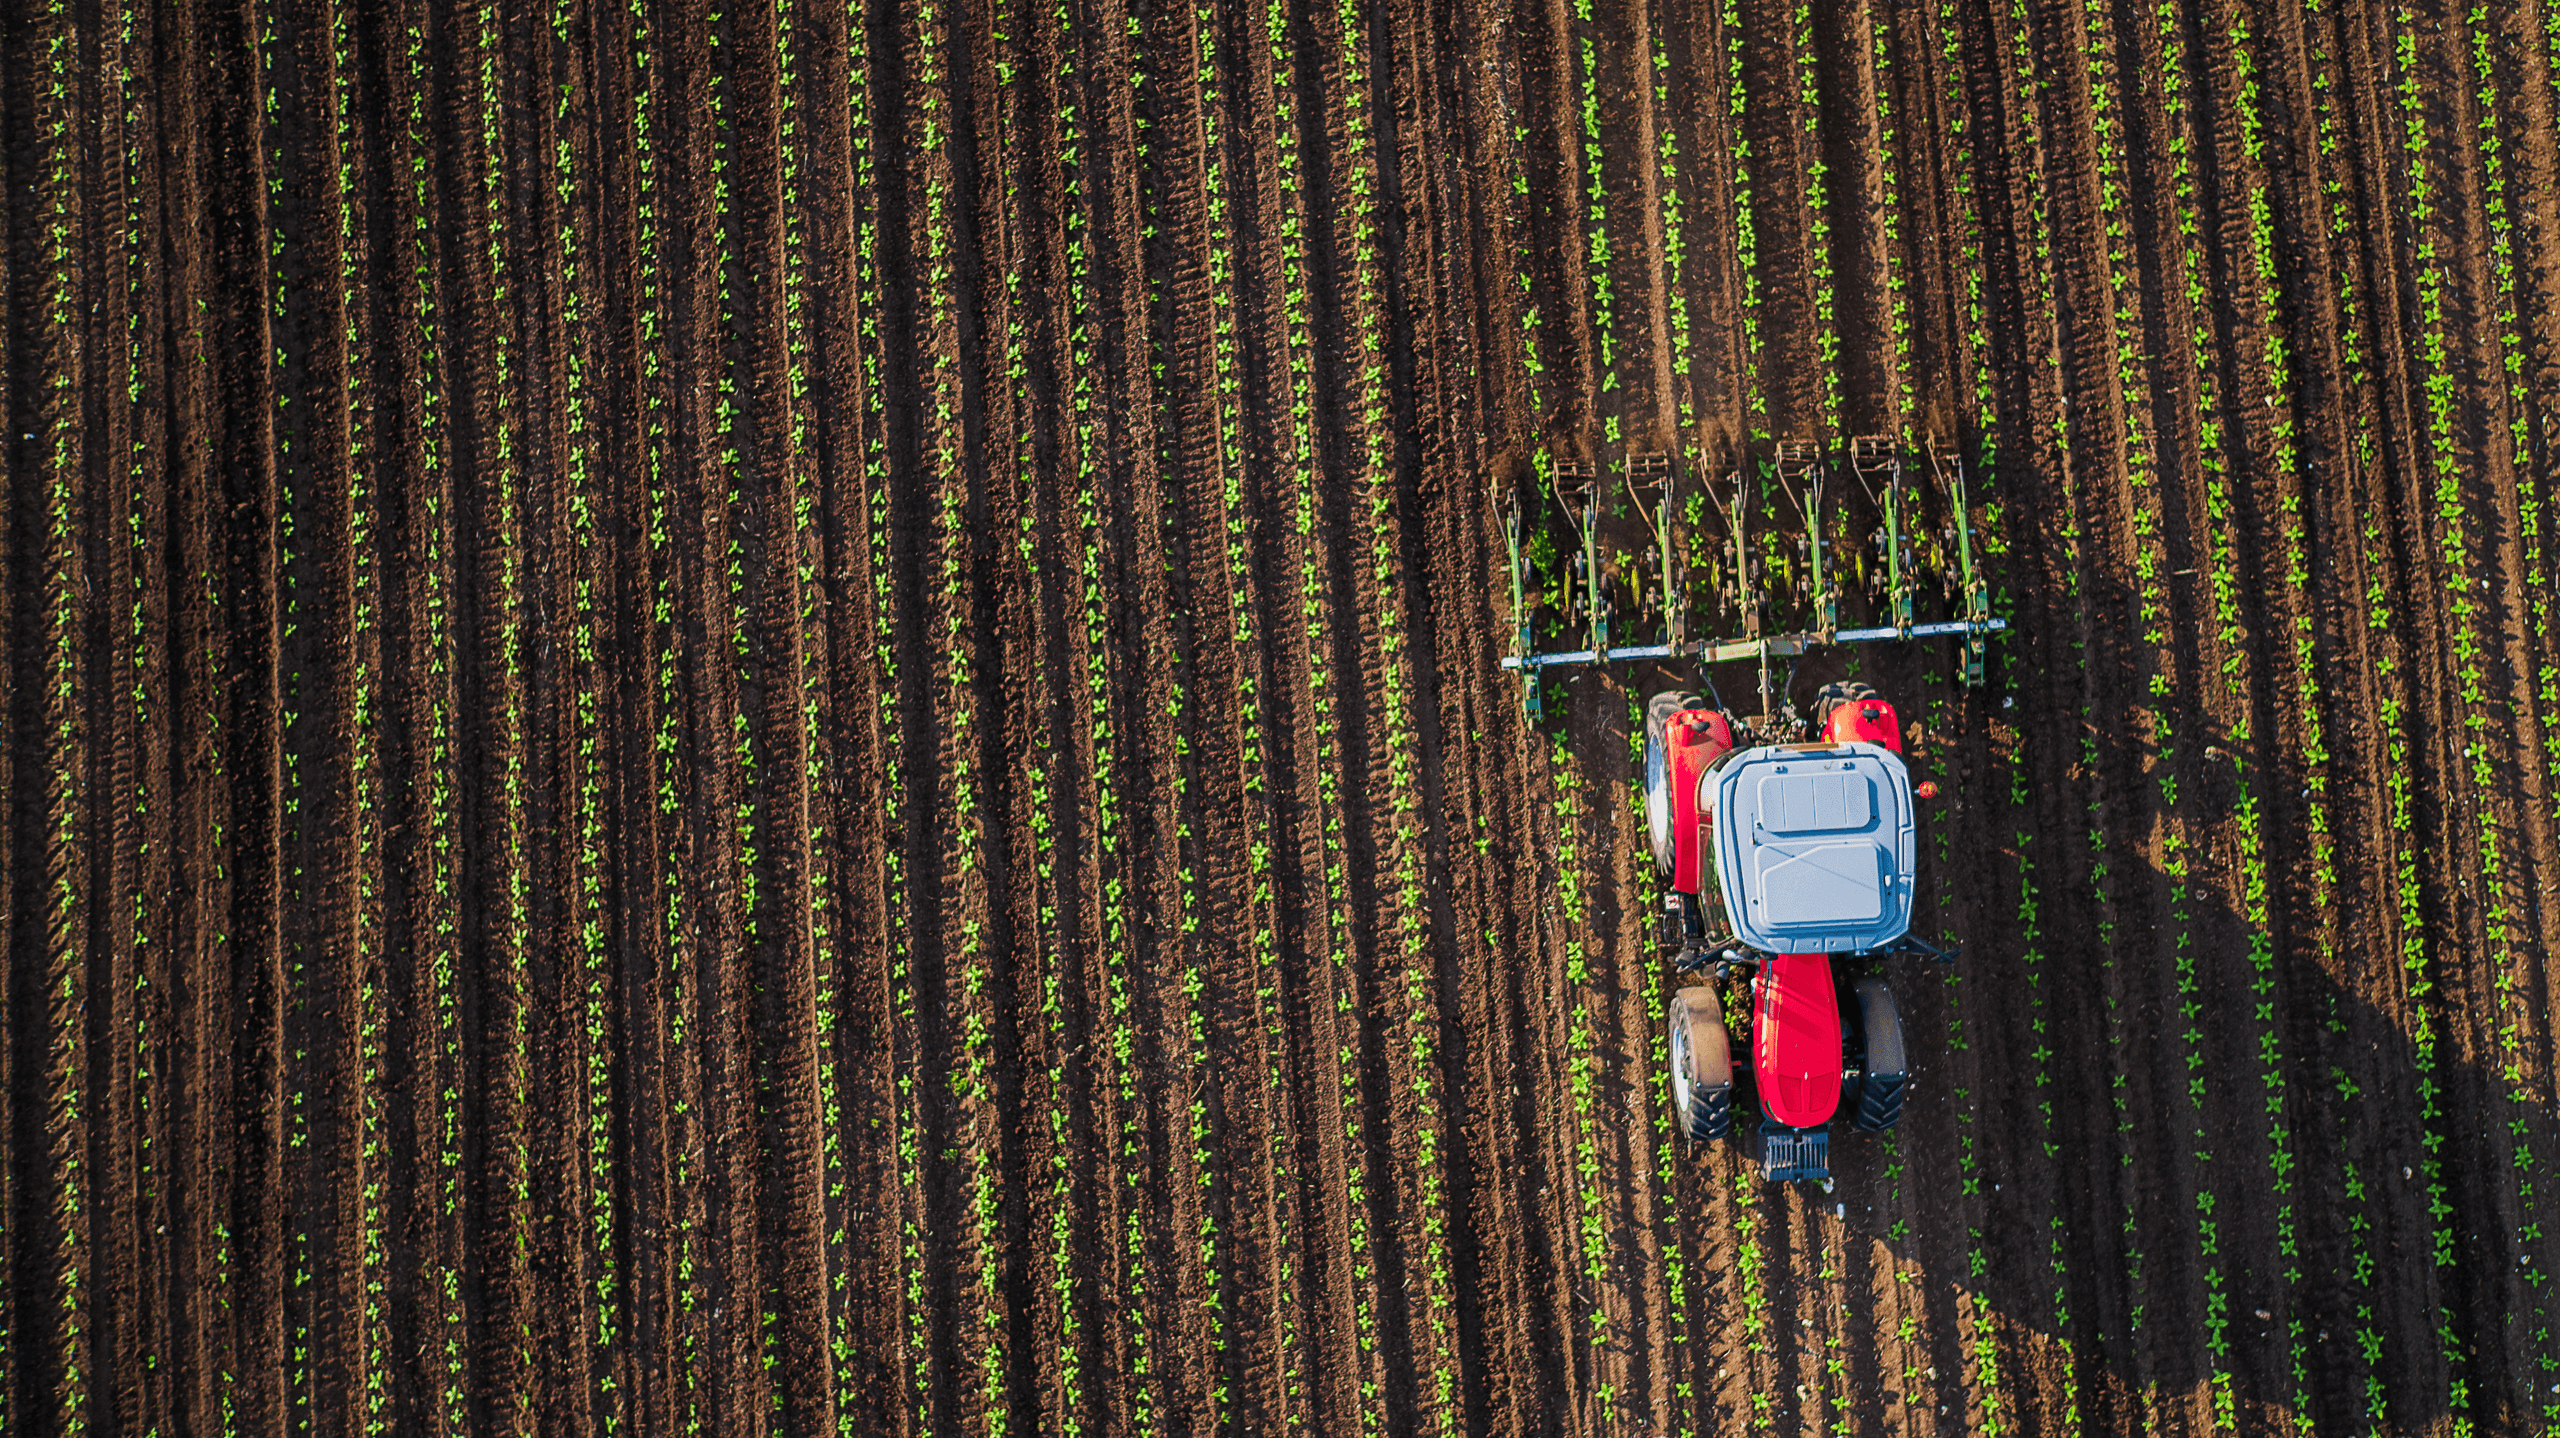 Aerial view of tractor in field